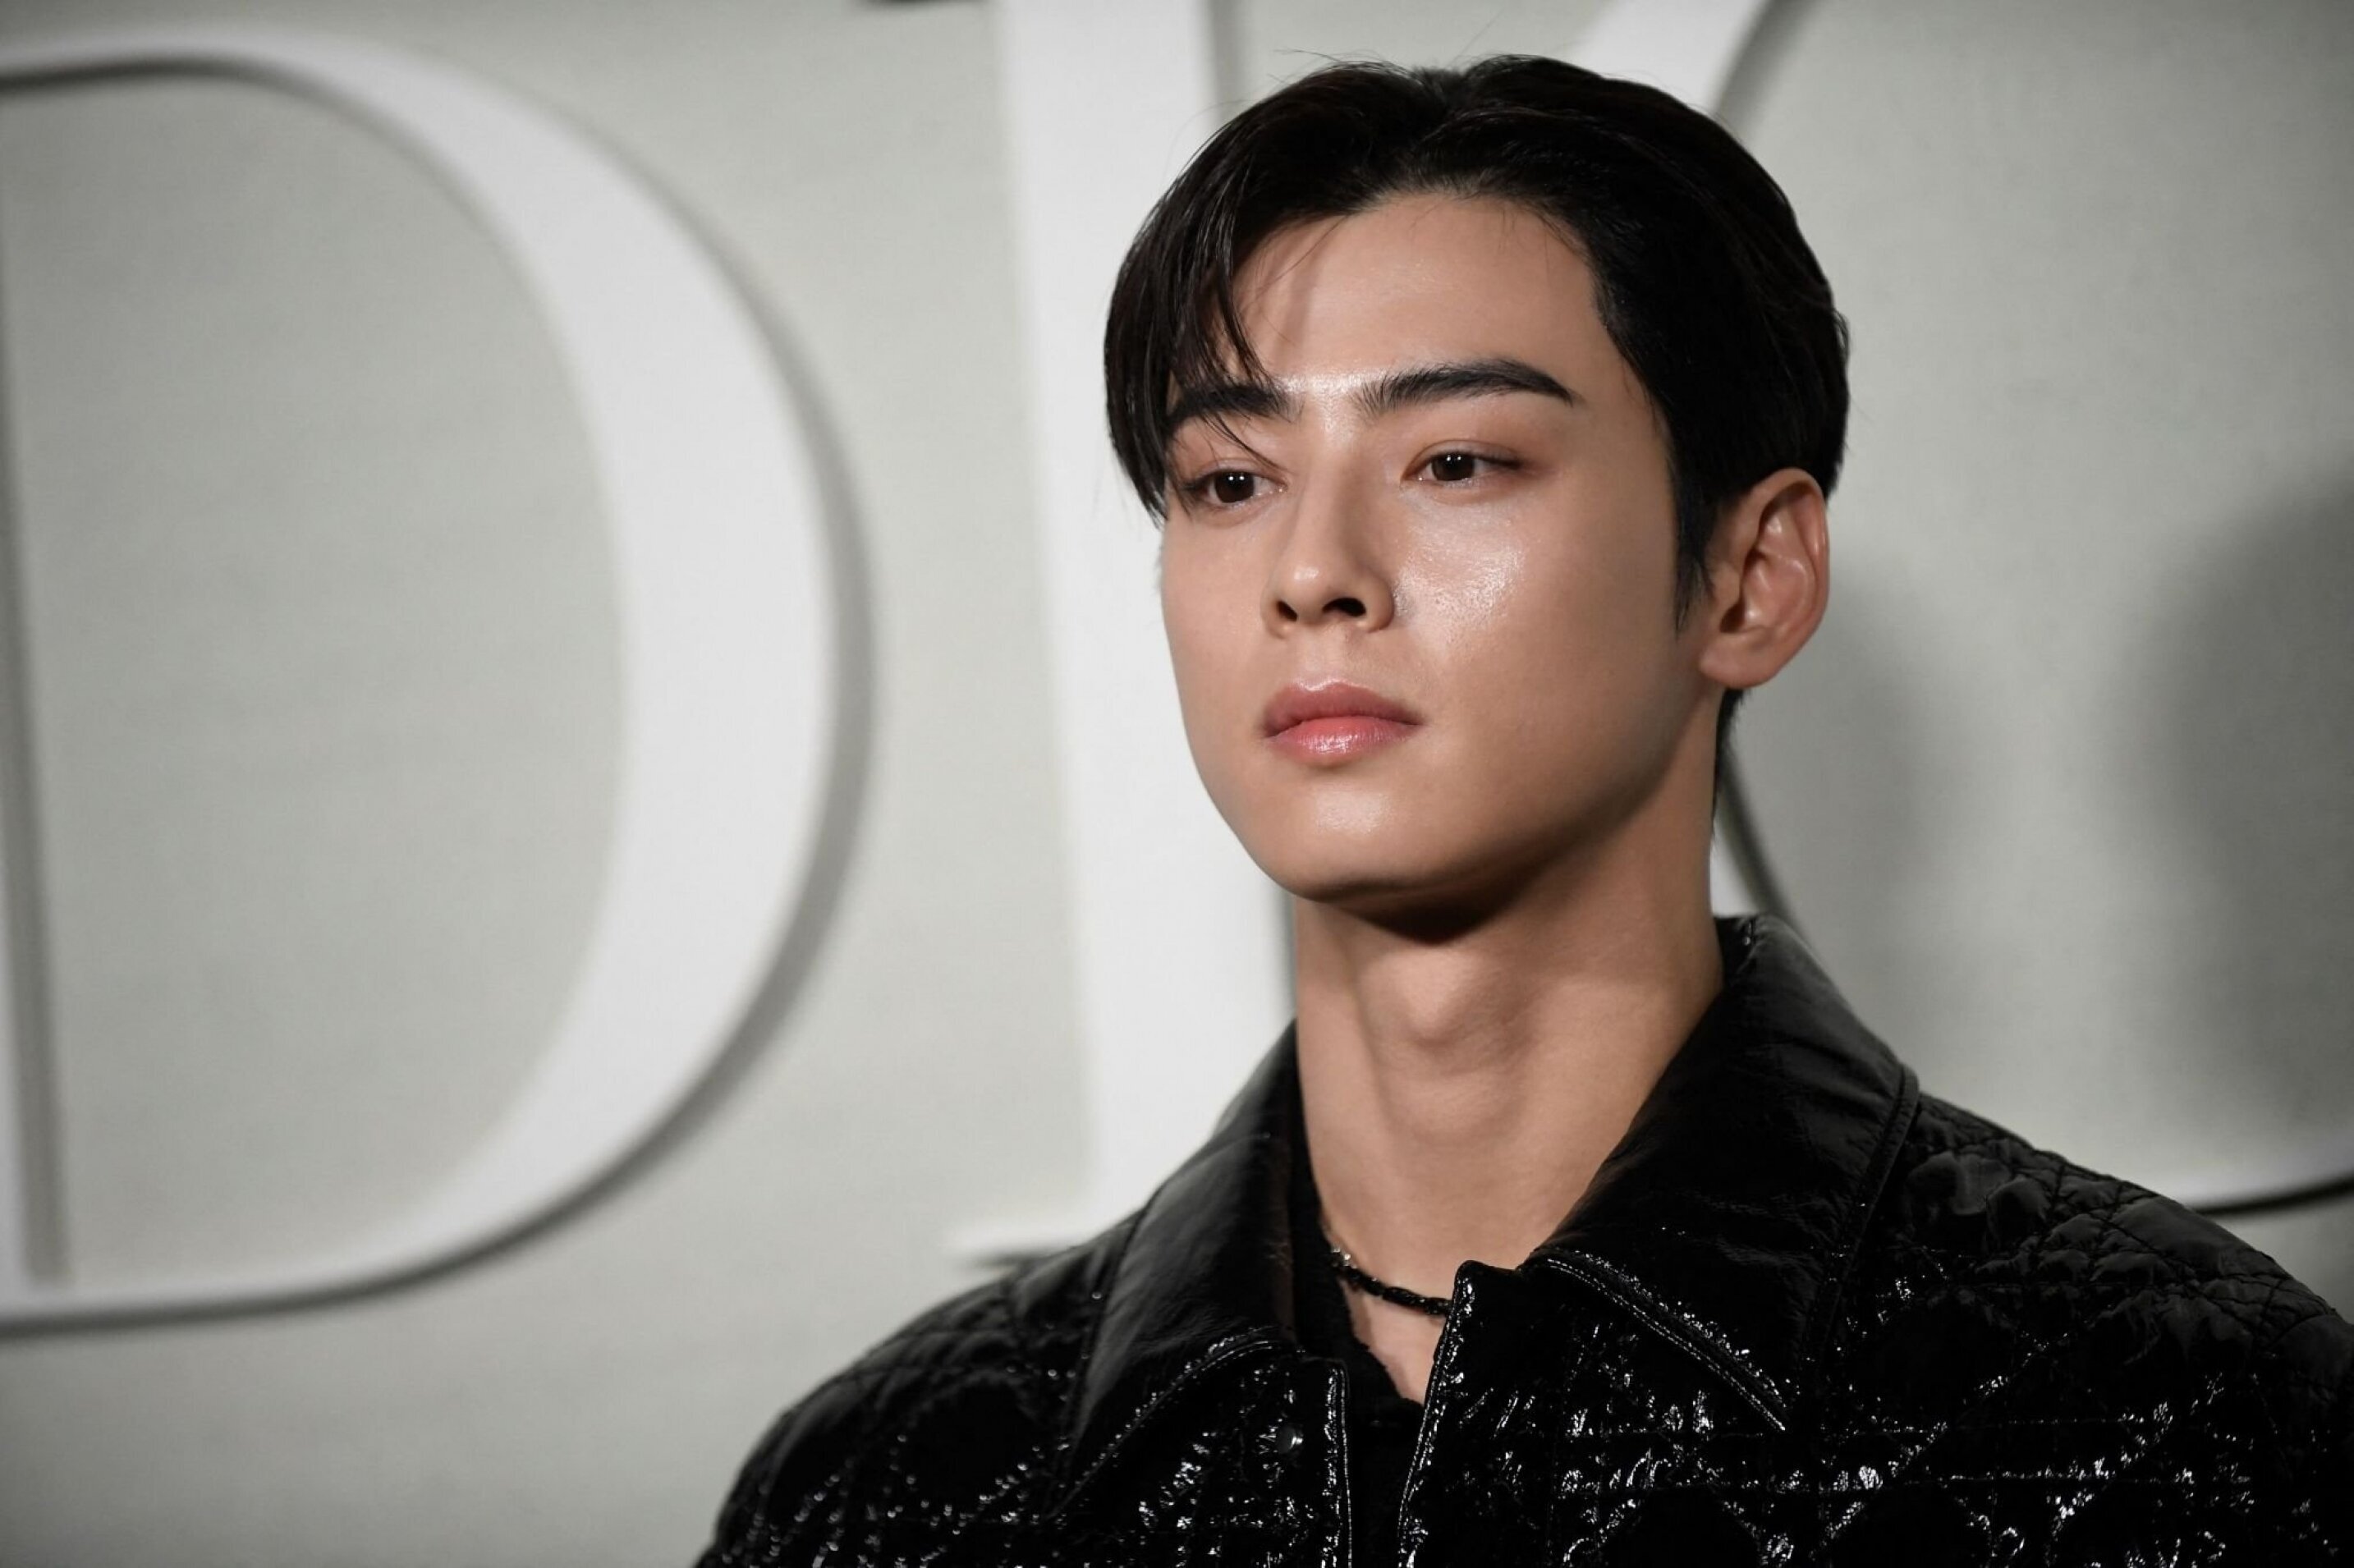 woo Pops in Logo Sneakers at Dior's Fall 2023 Menswear Show – Rvce News - Cha  Eun - Must-Have Art&isanal Shoe Brand Dorateymur